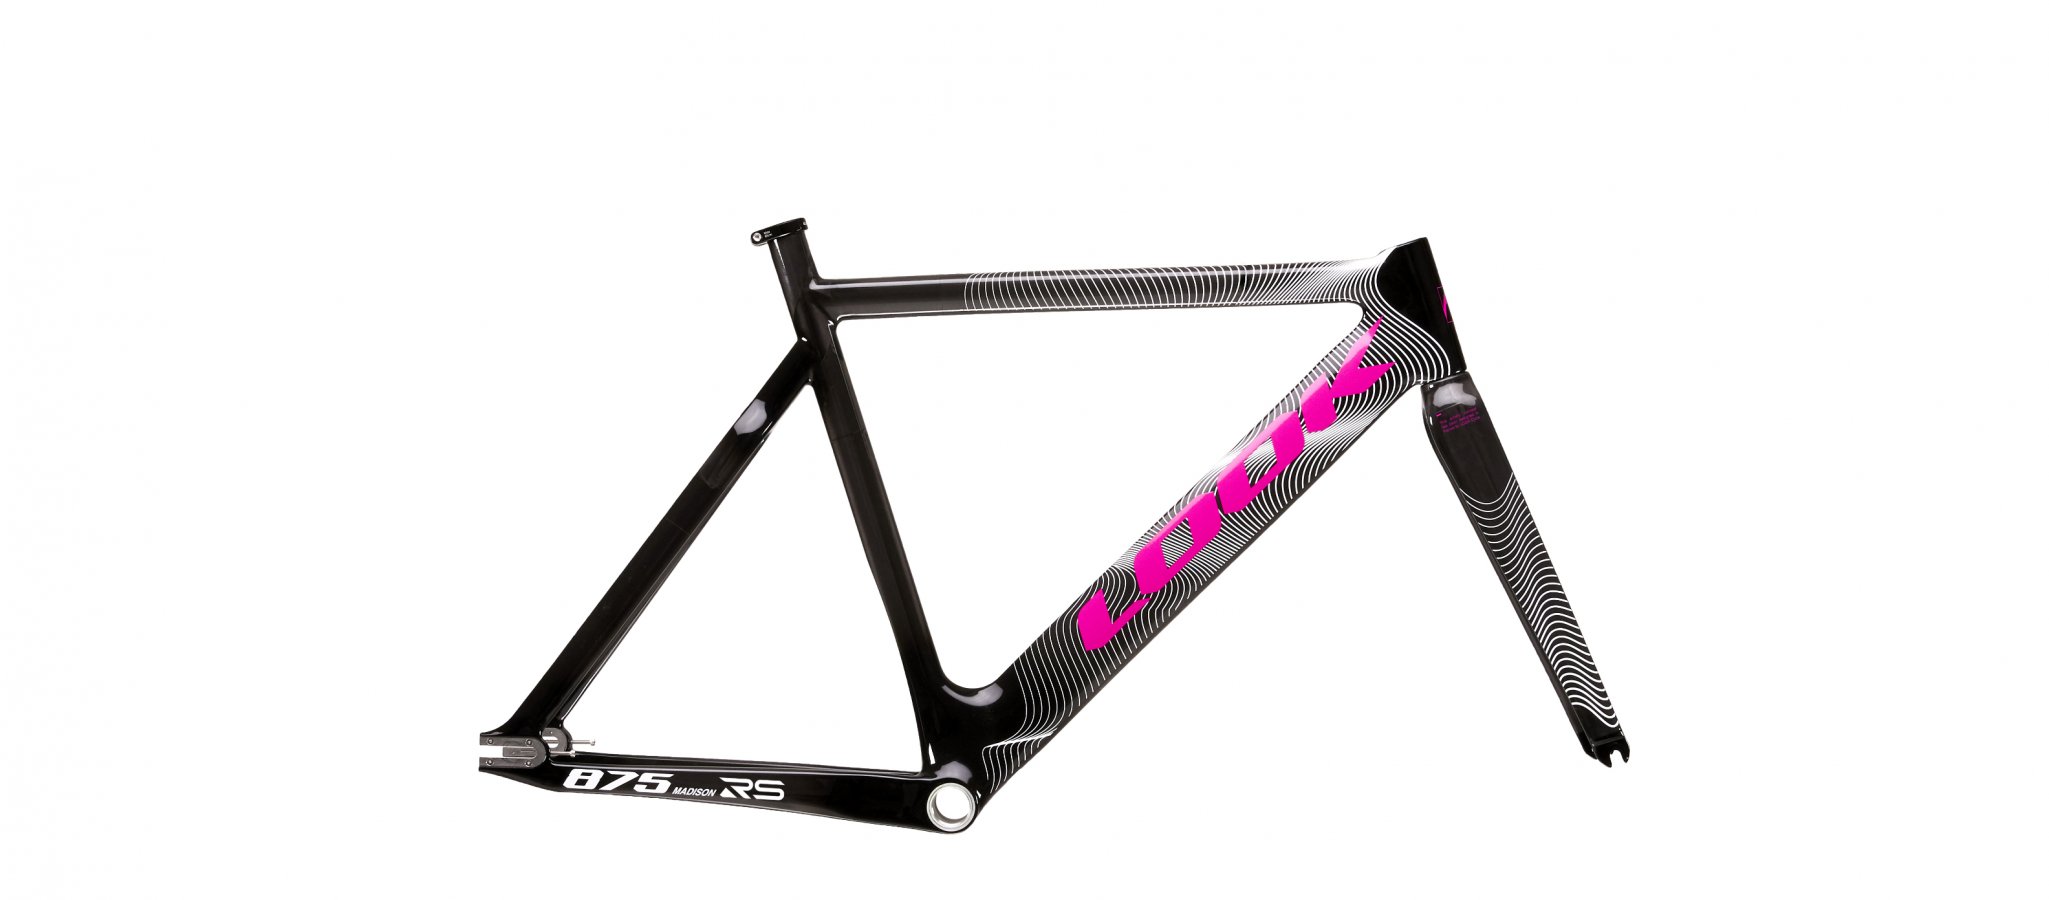 875-madison-rs-team-look-crit-limited-edition